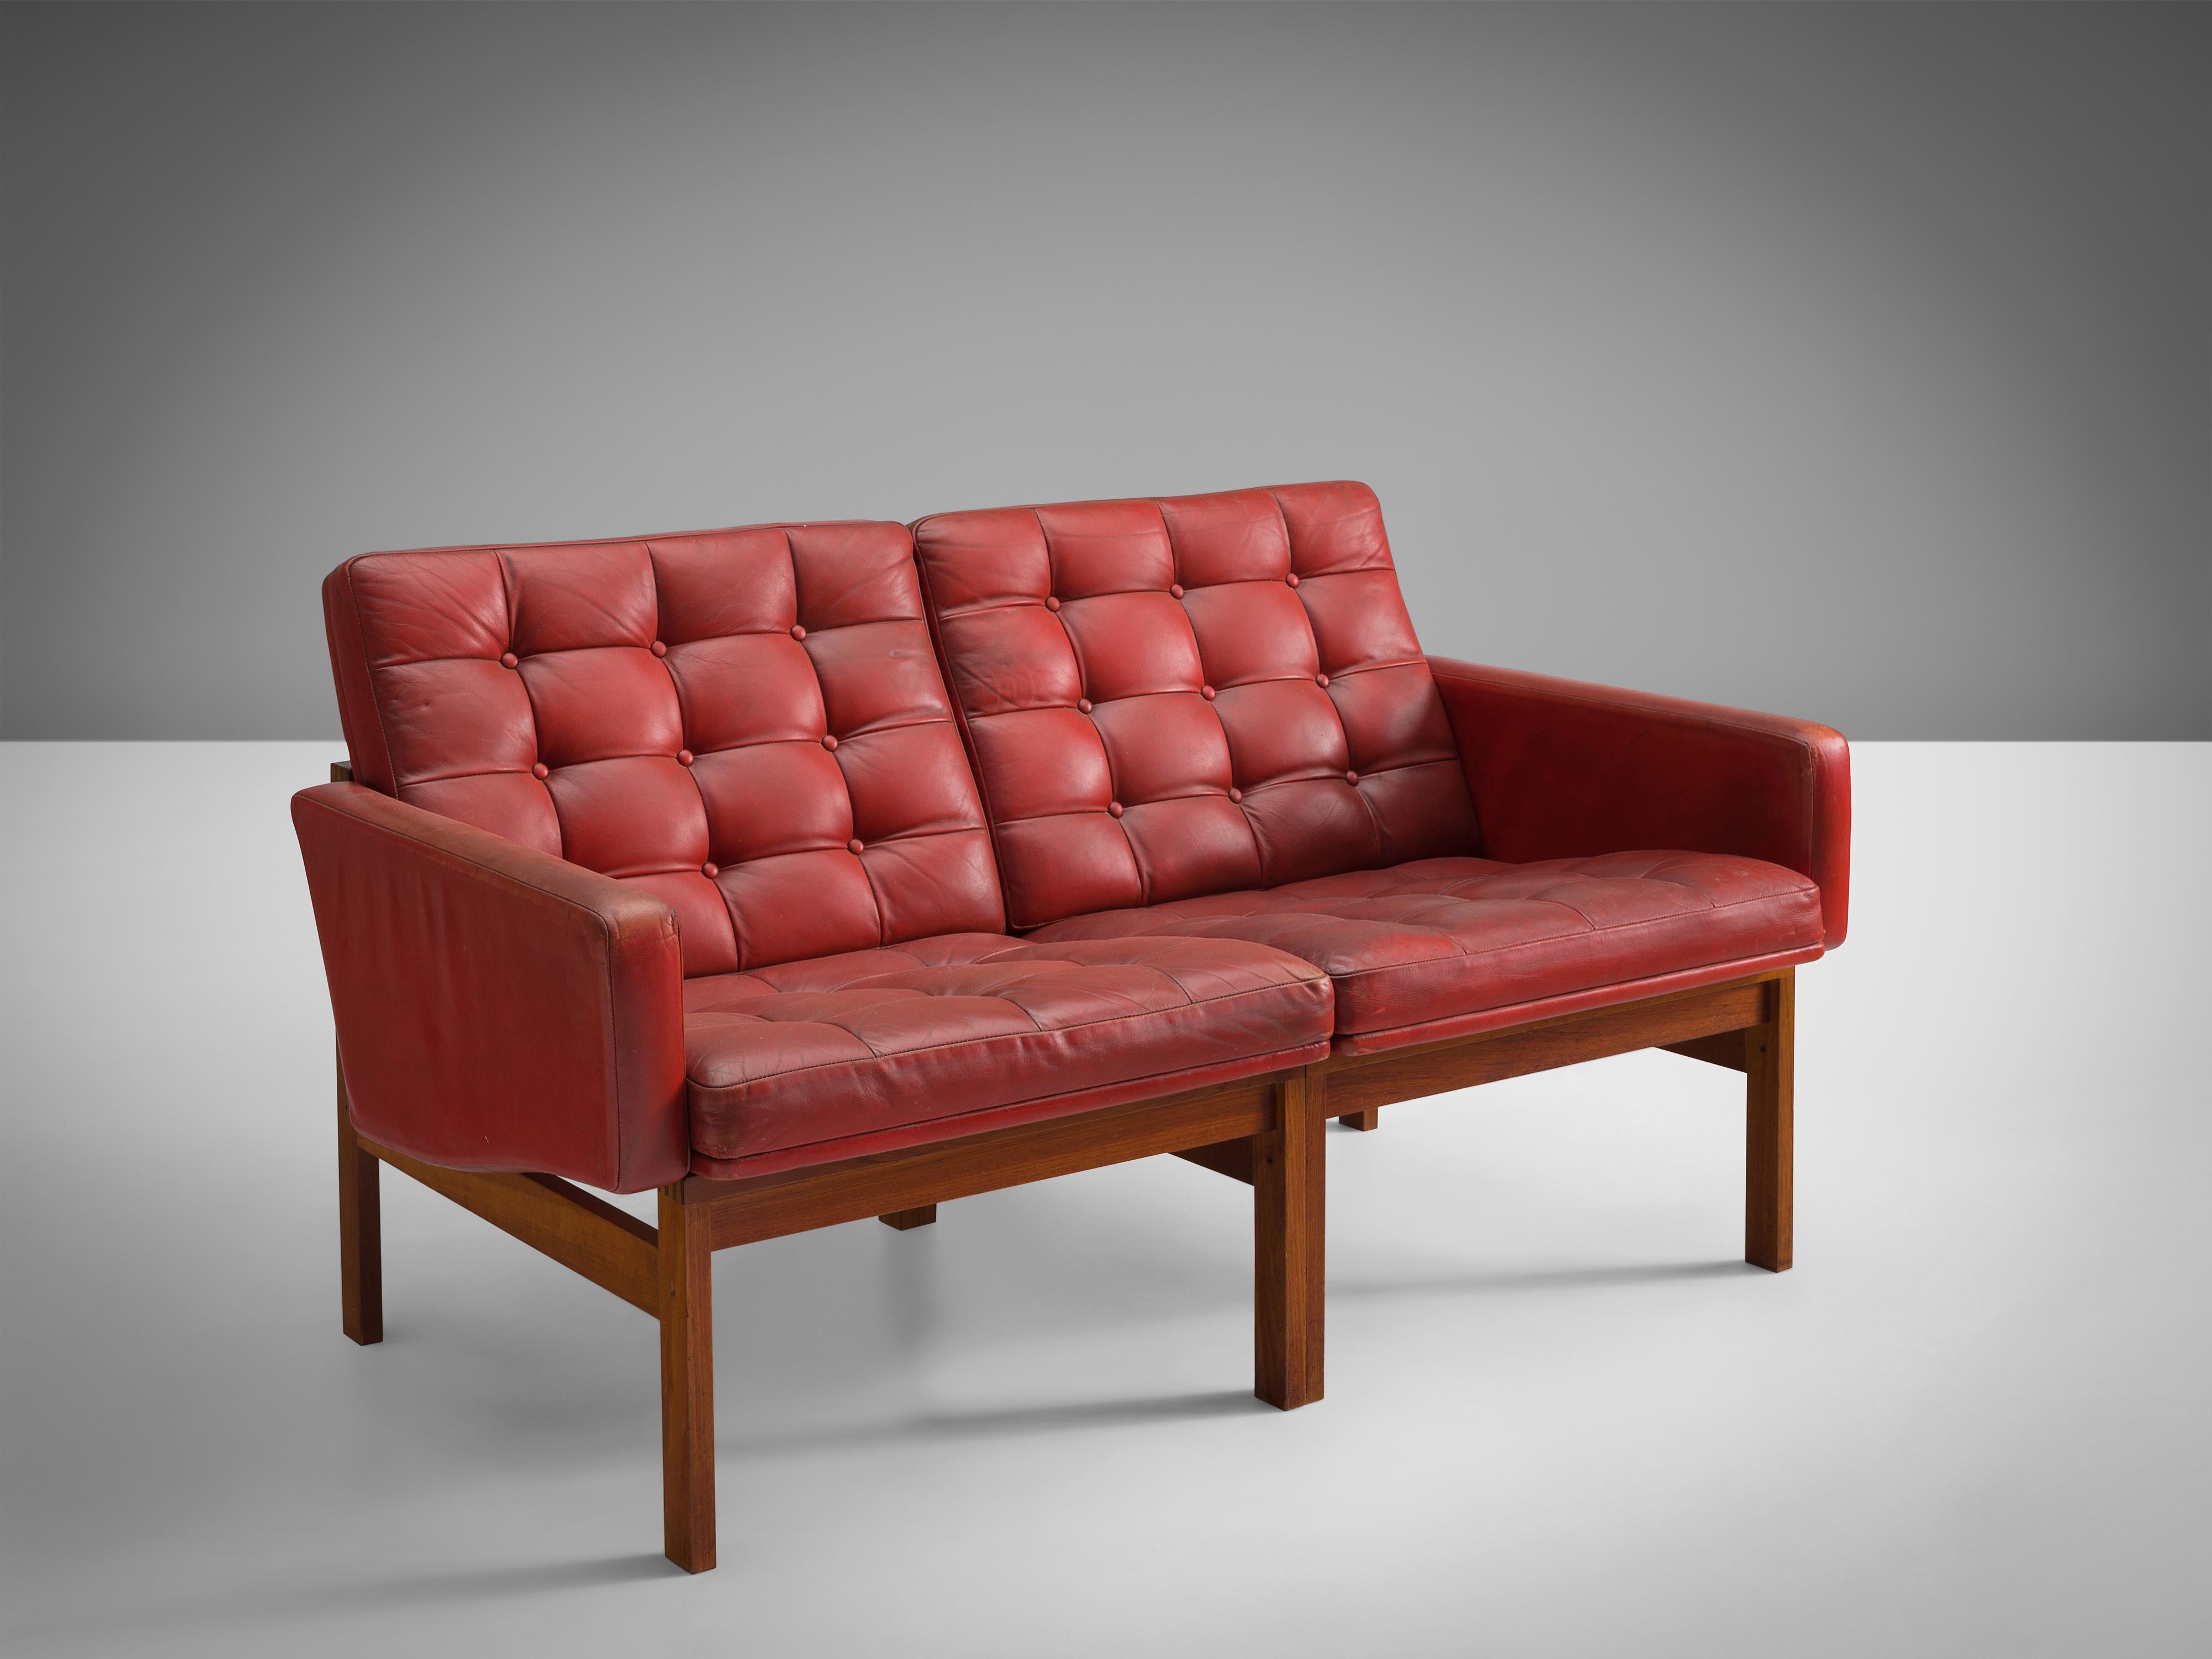 Ole Gjerløv-Knudsen & Torben Lind for France & Søn, two seater sofa, teak, leather, Denmark, 1962 

Modern and beautiful constructed sofa based on a tight and simple design. The teak frame holds a red leather body with buttoned cushions in patinated